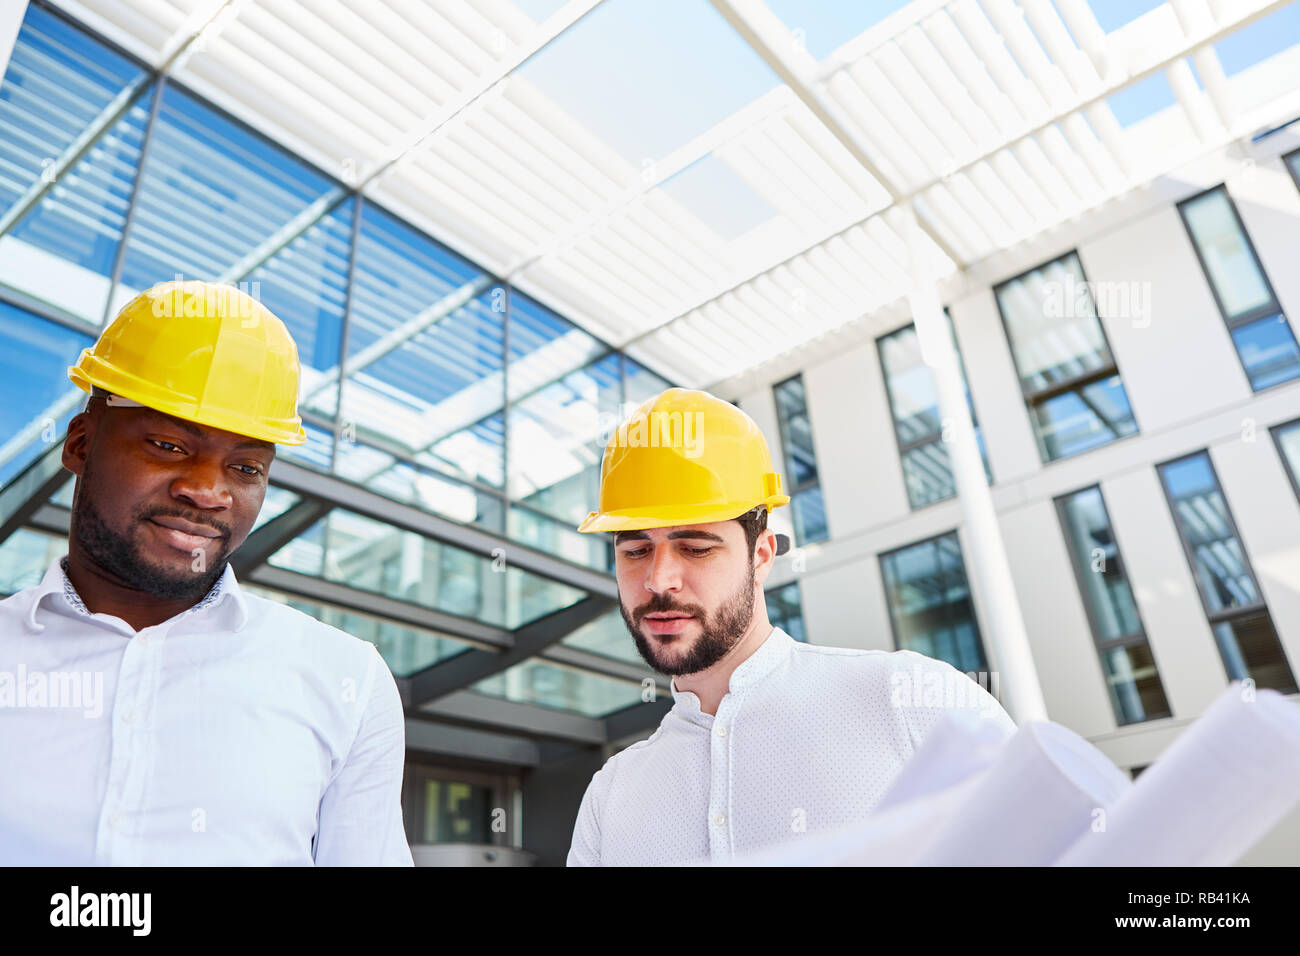 Two business people as an architect with architectural drawing in front of an office building Stock Photo